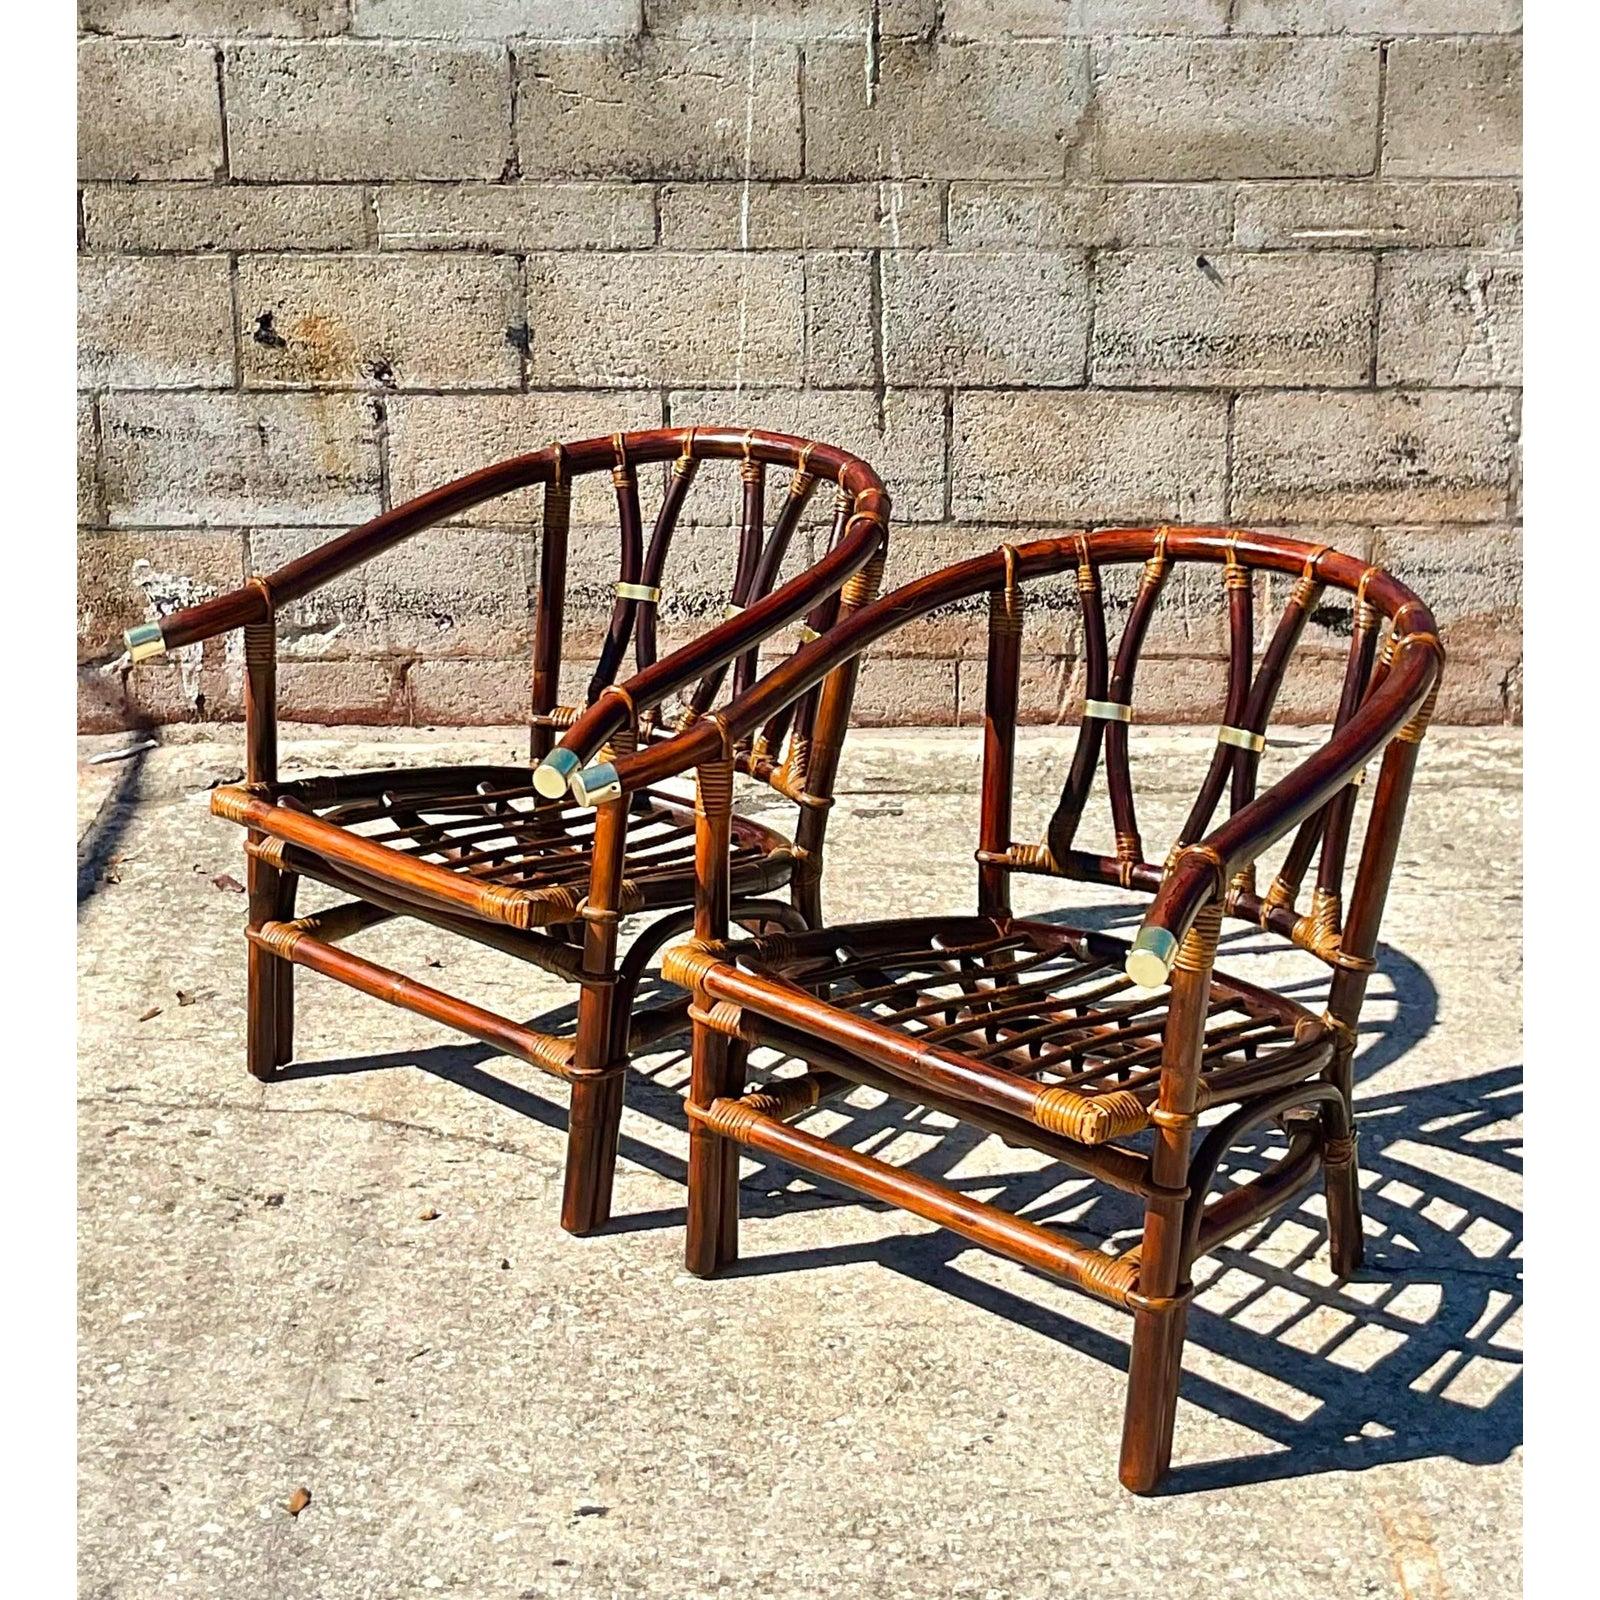 Fantastic pair of vintage Coastal Ficks Reed arm chairs. Made by the Iconic John Wisner and part of the coveted Far East collection. Chic brass hardware and deep rich brown make these a great addition to any décor. Acquired from a Palm Beach estate.